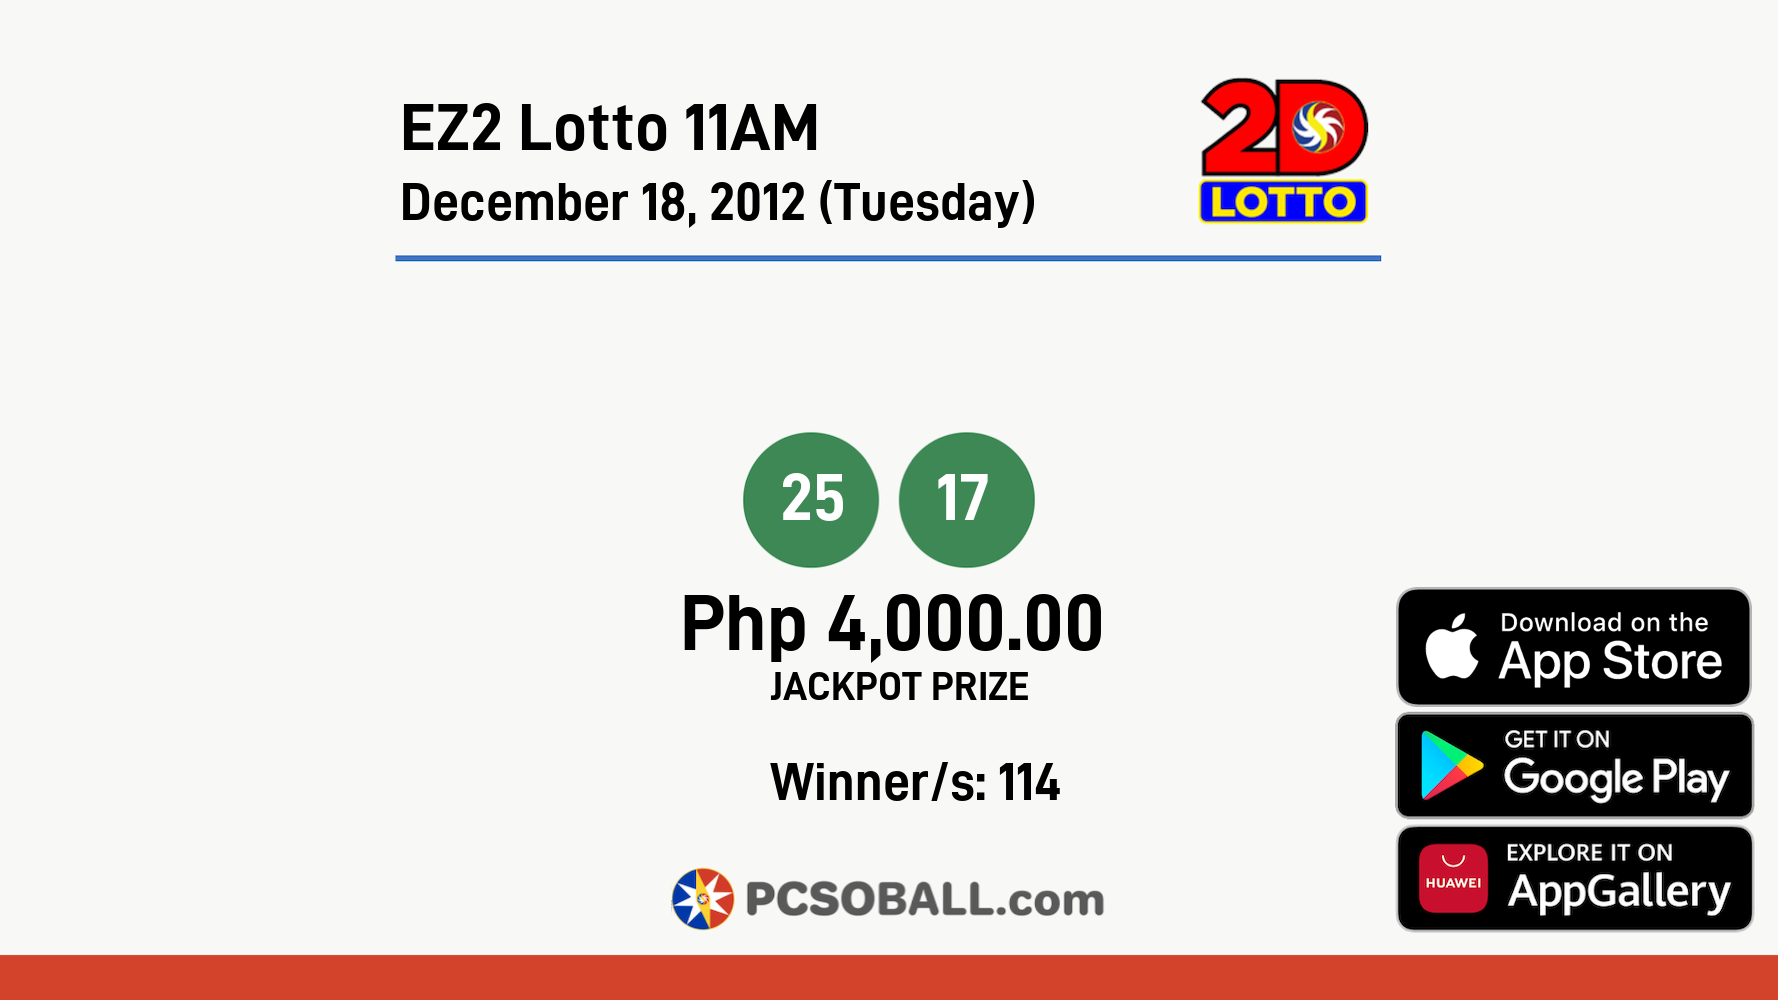 EZ2 Lotto 11AM December 18, 2012 (Tuesday) Result